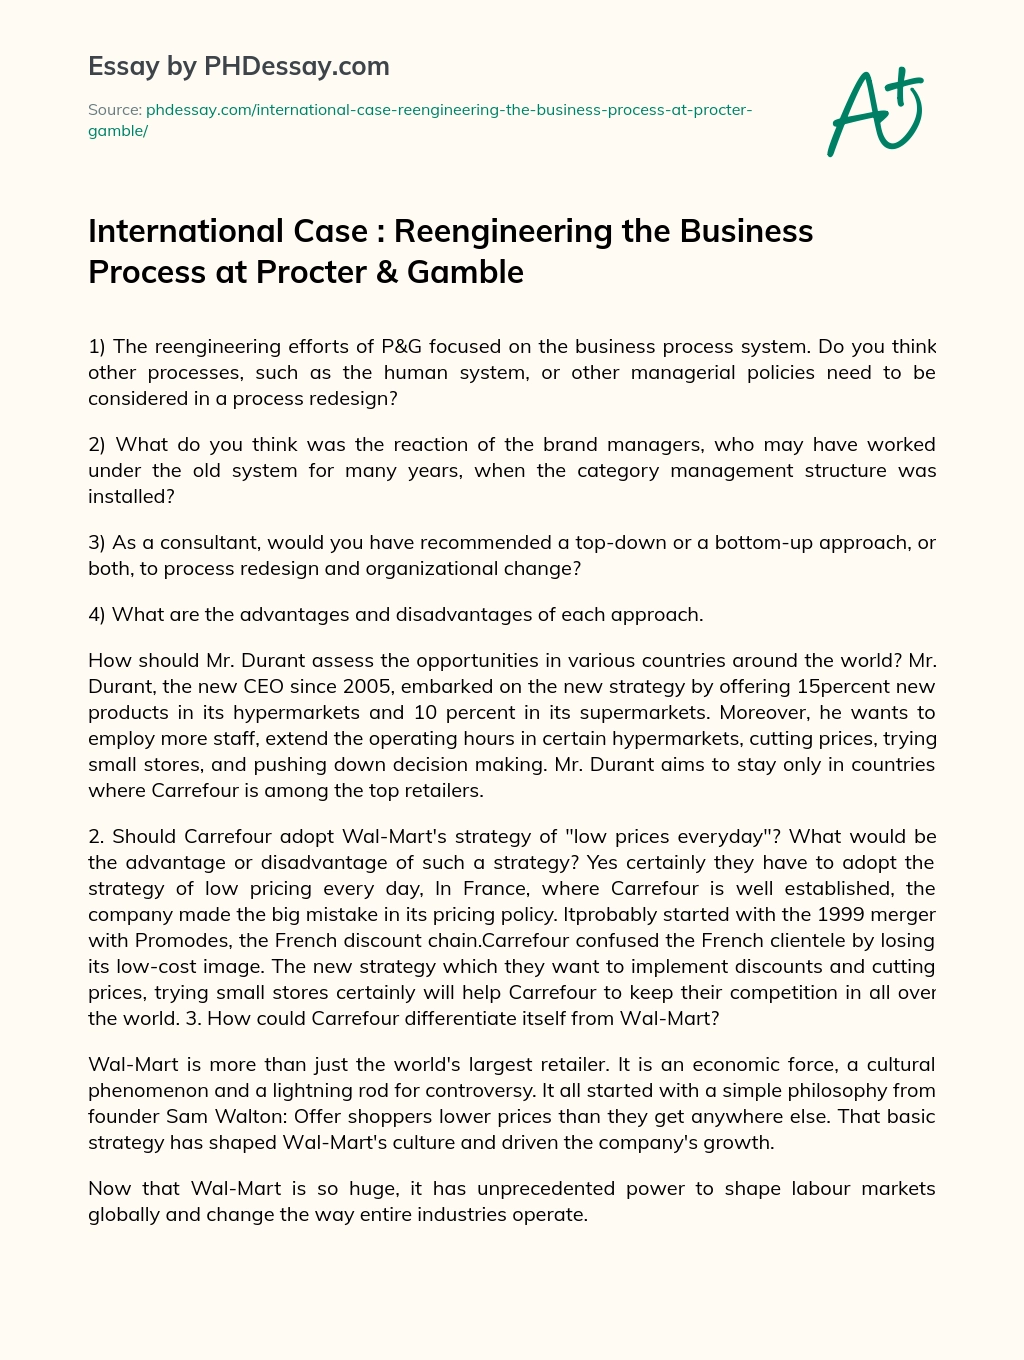 International Case : Reengineering the Business Process at Procter & Gamble essay